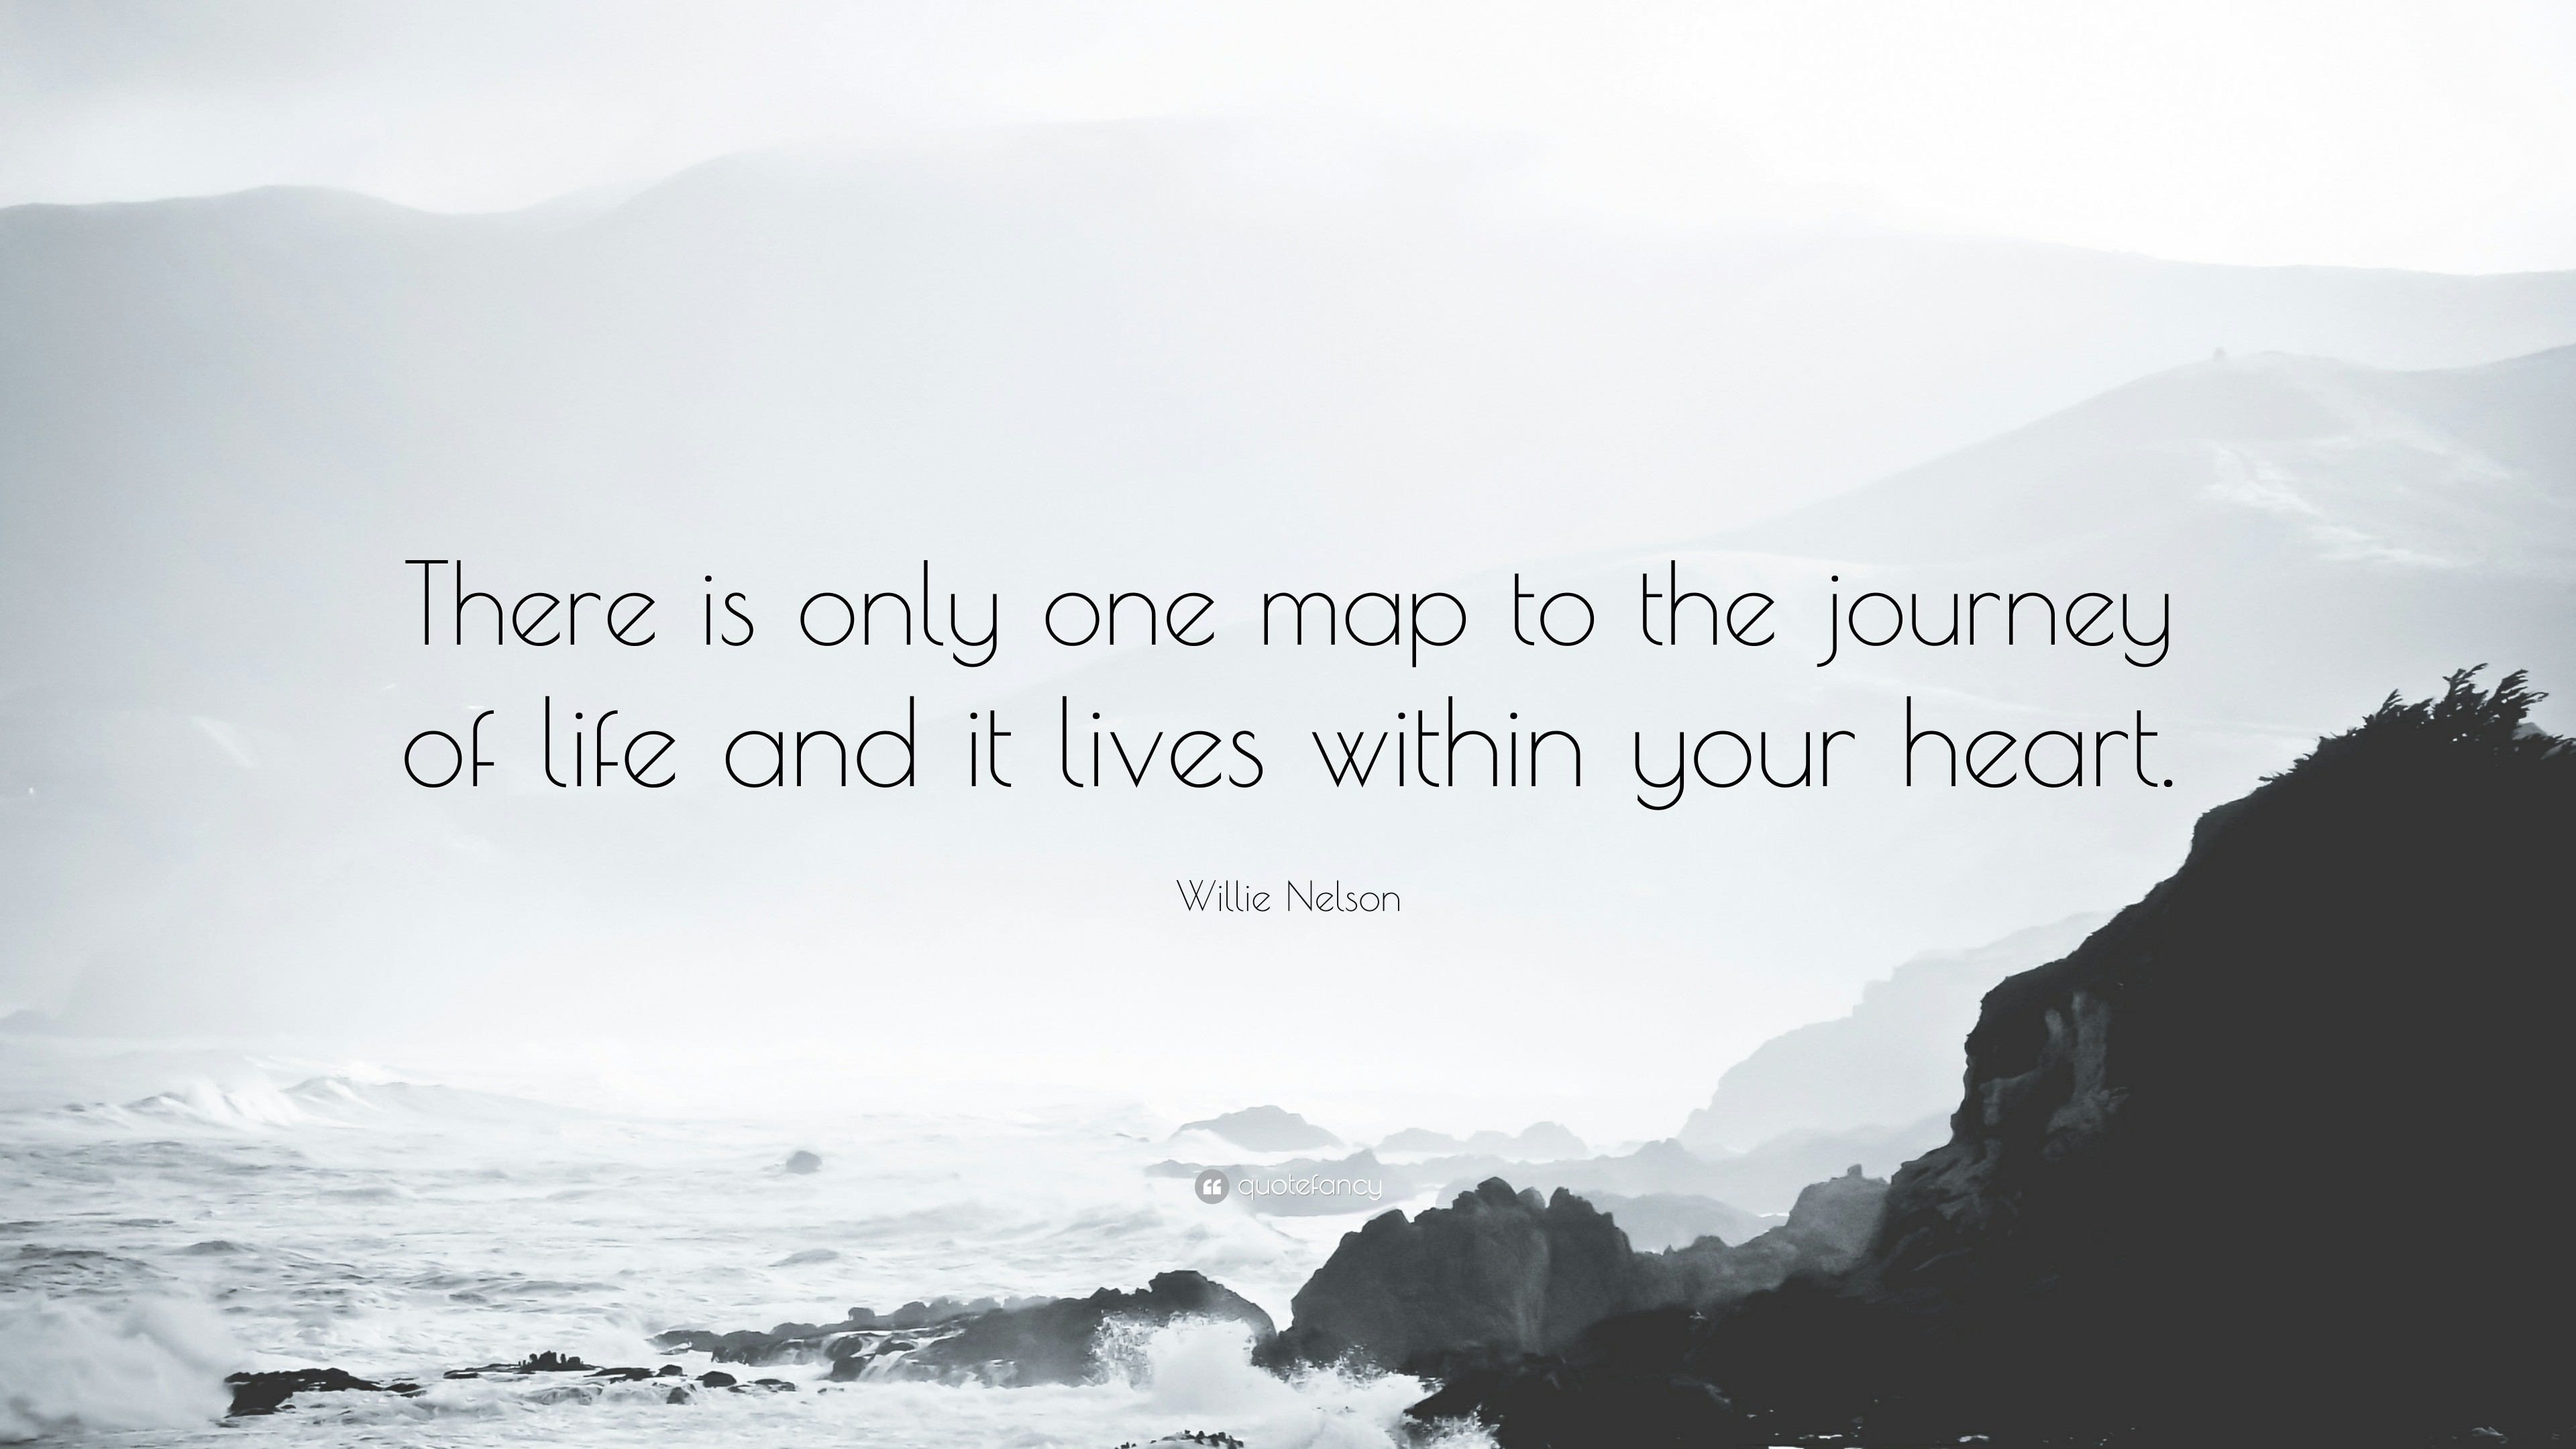 3840x2160 Willie Nelson Quote: “There is only one map to the journey of life and